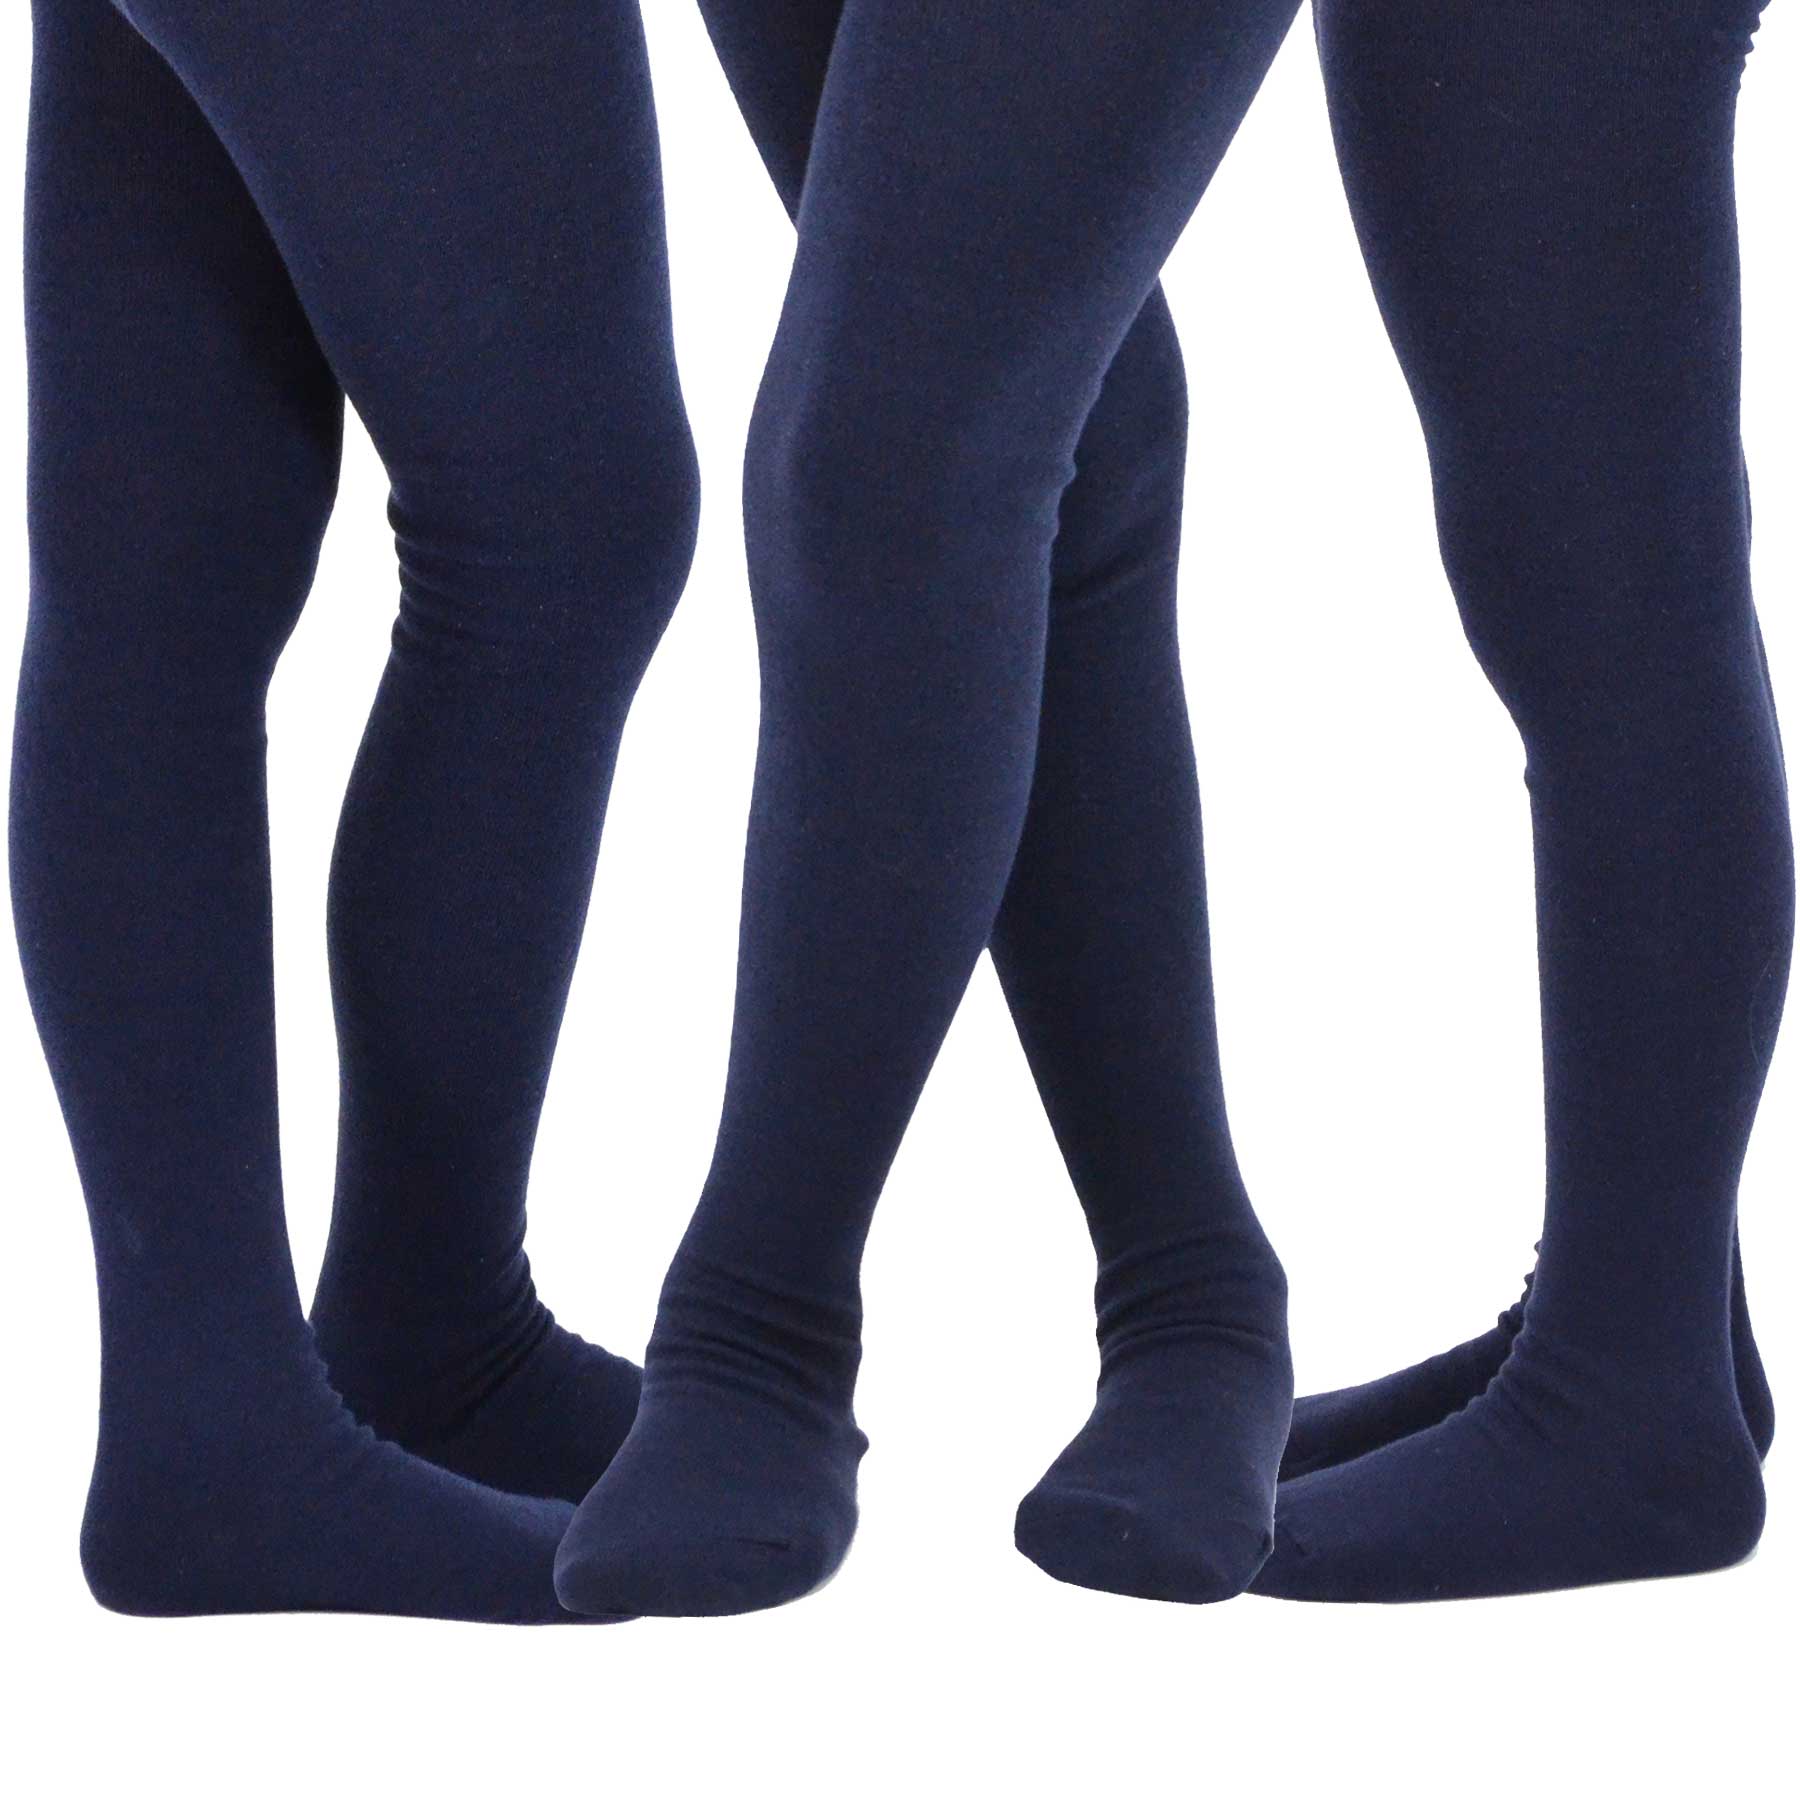 Wholesale Girls Cotton Tights in Navy. Flat Style. Great for School  Uniforms.